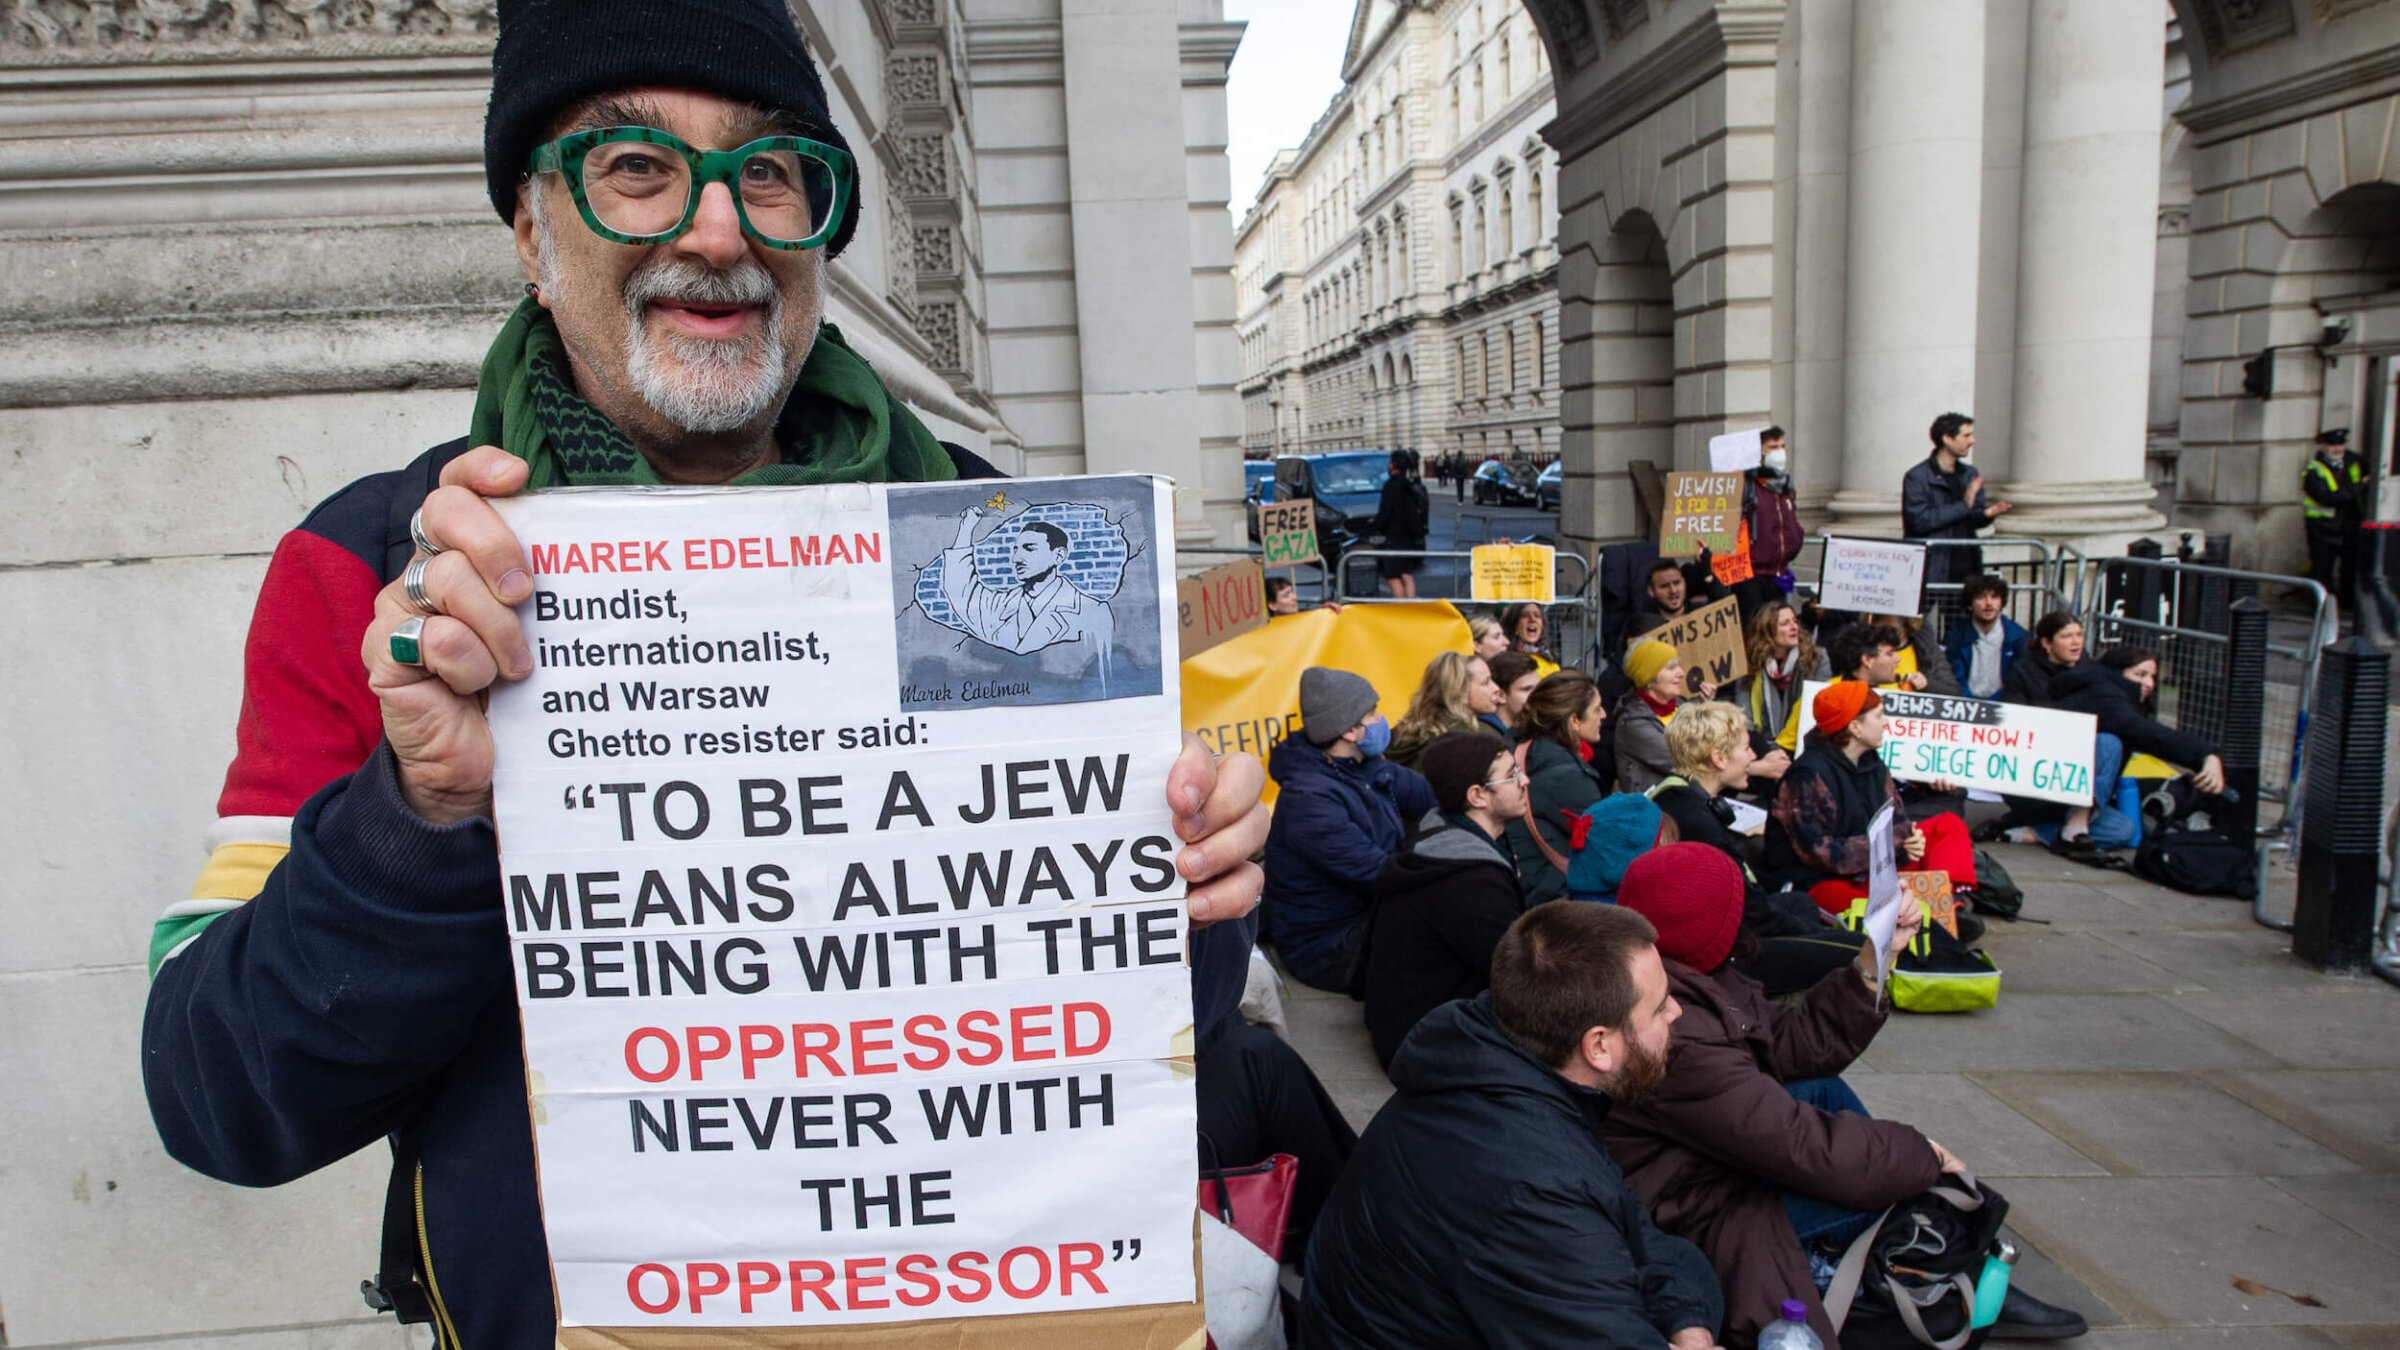 Activists from Na'amod, an organization of British Jews who oppose Israel's occupation of the West Bank, blocked walkways into a government building last week to demand a cease-fire in Gaza.